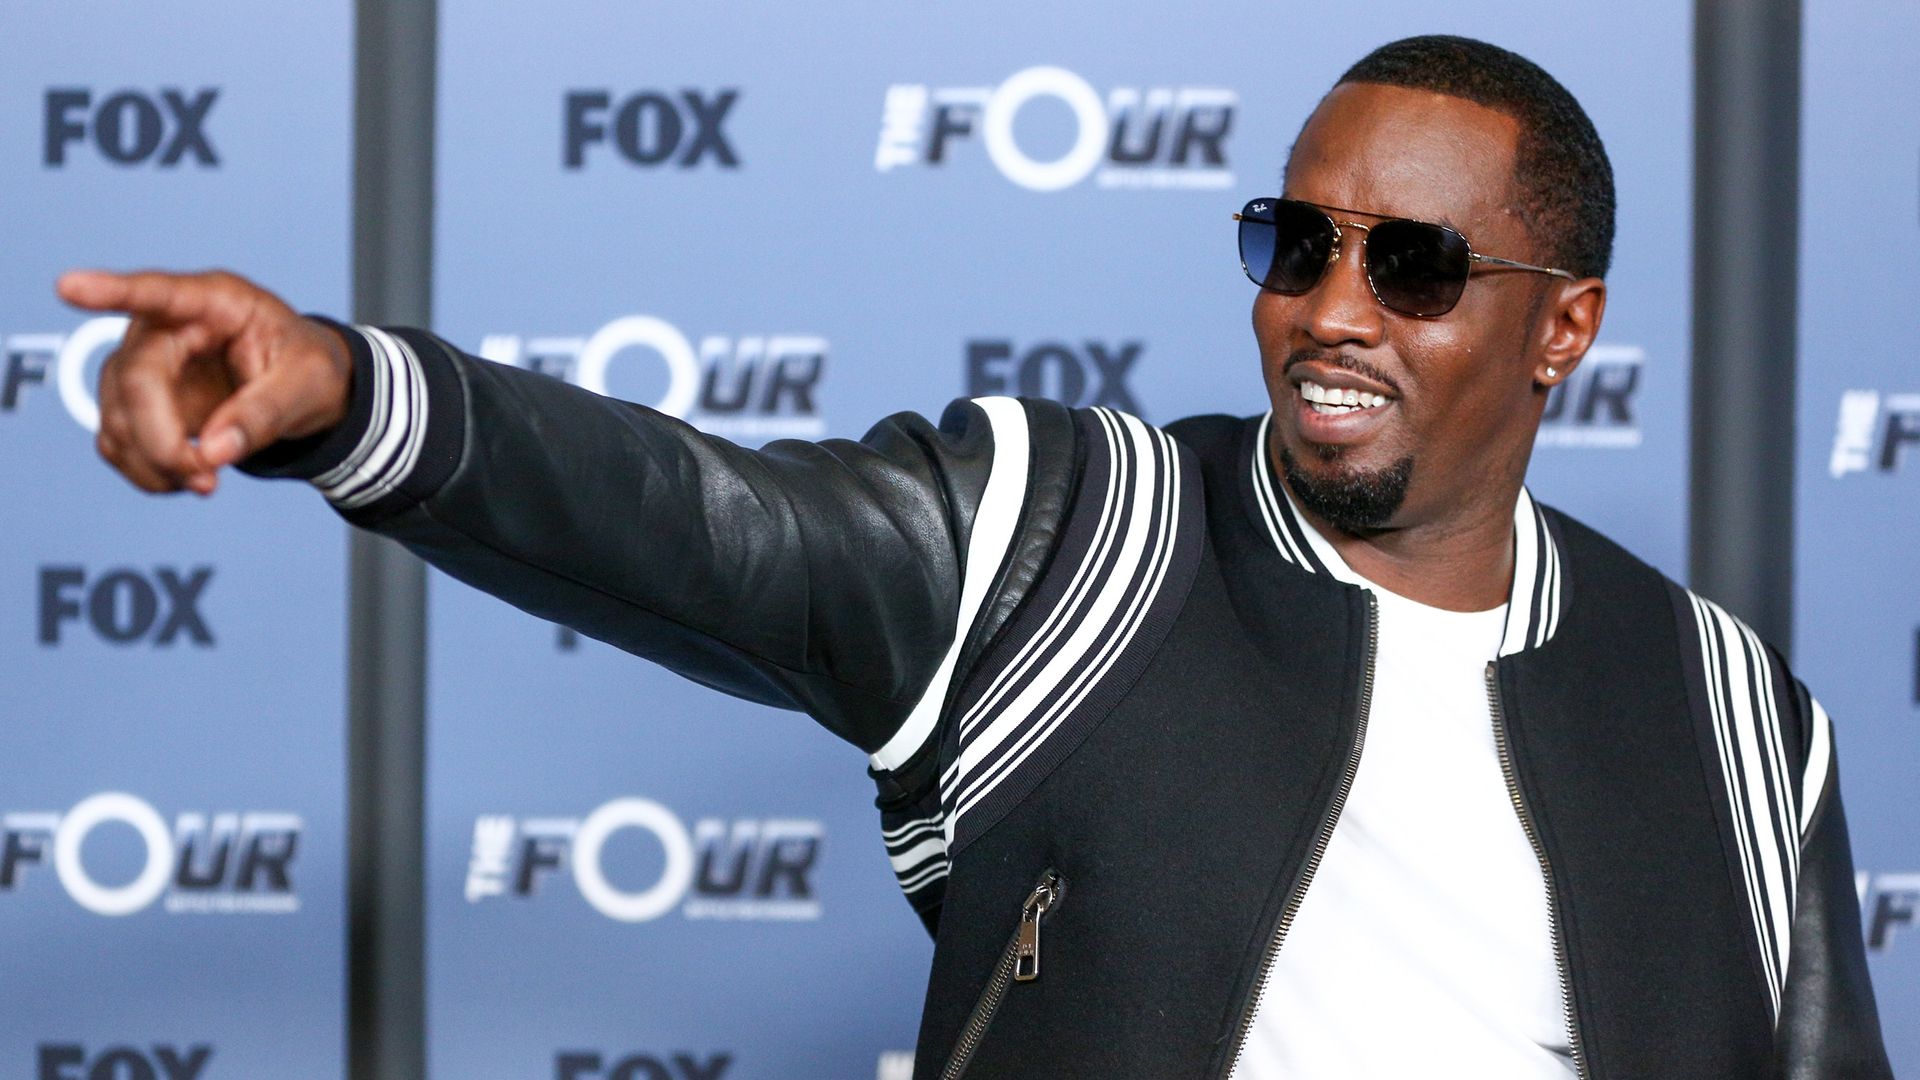 Sean 'Diddy Combs' breaks his silence and says he's a victim of a 'witch hunt'